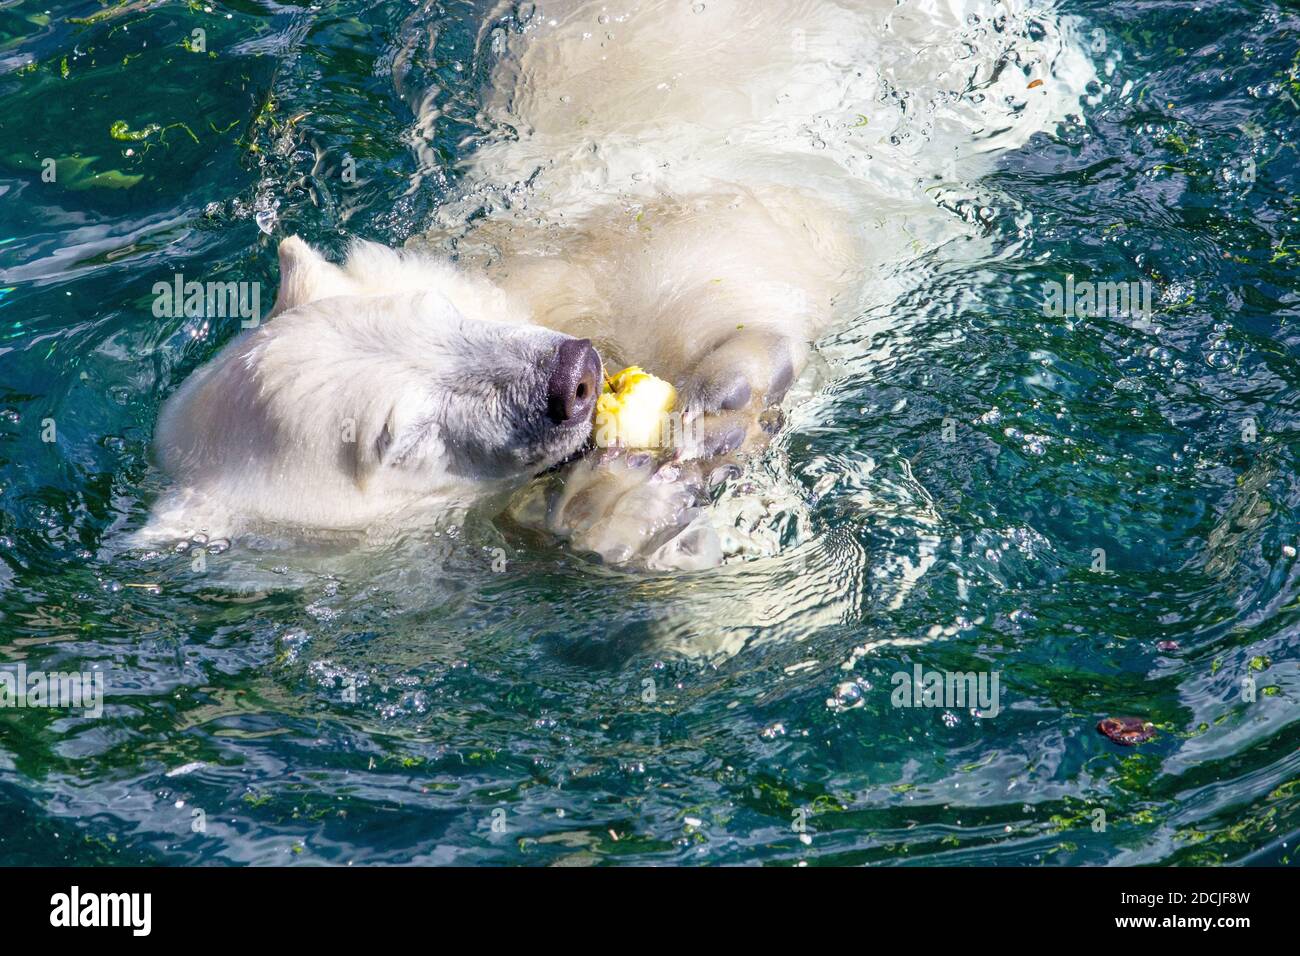 View of a young polar bear eating an apple, scientific name Ursus maritimus Stock Photo